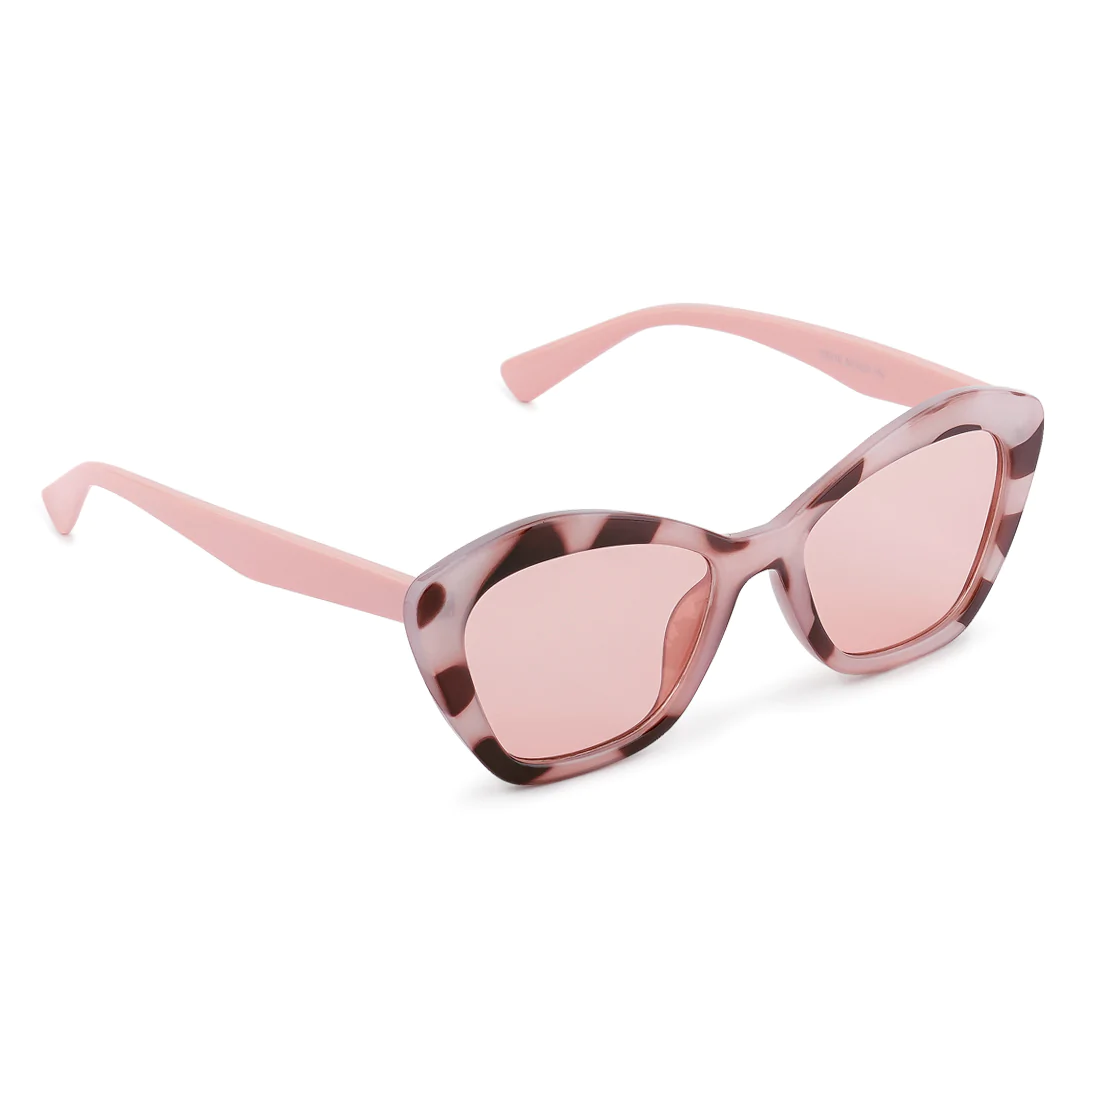 PRINTED FRAME BUTTERFLY SUNGLASSES IN PINK